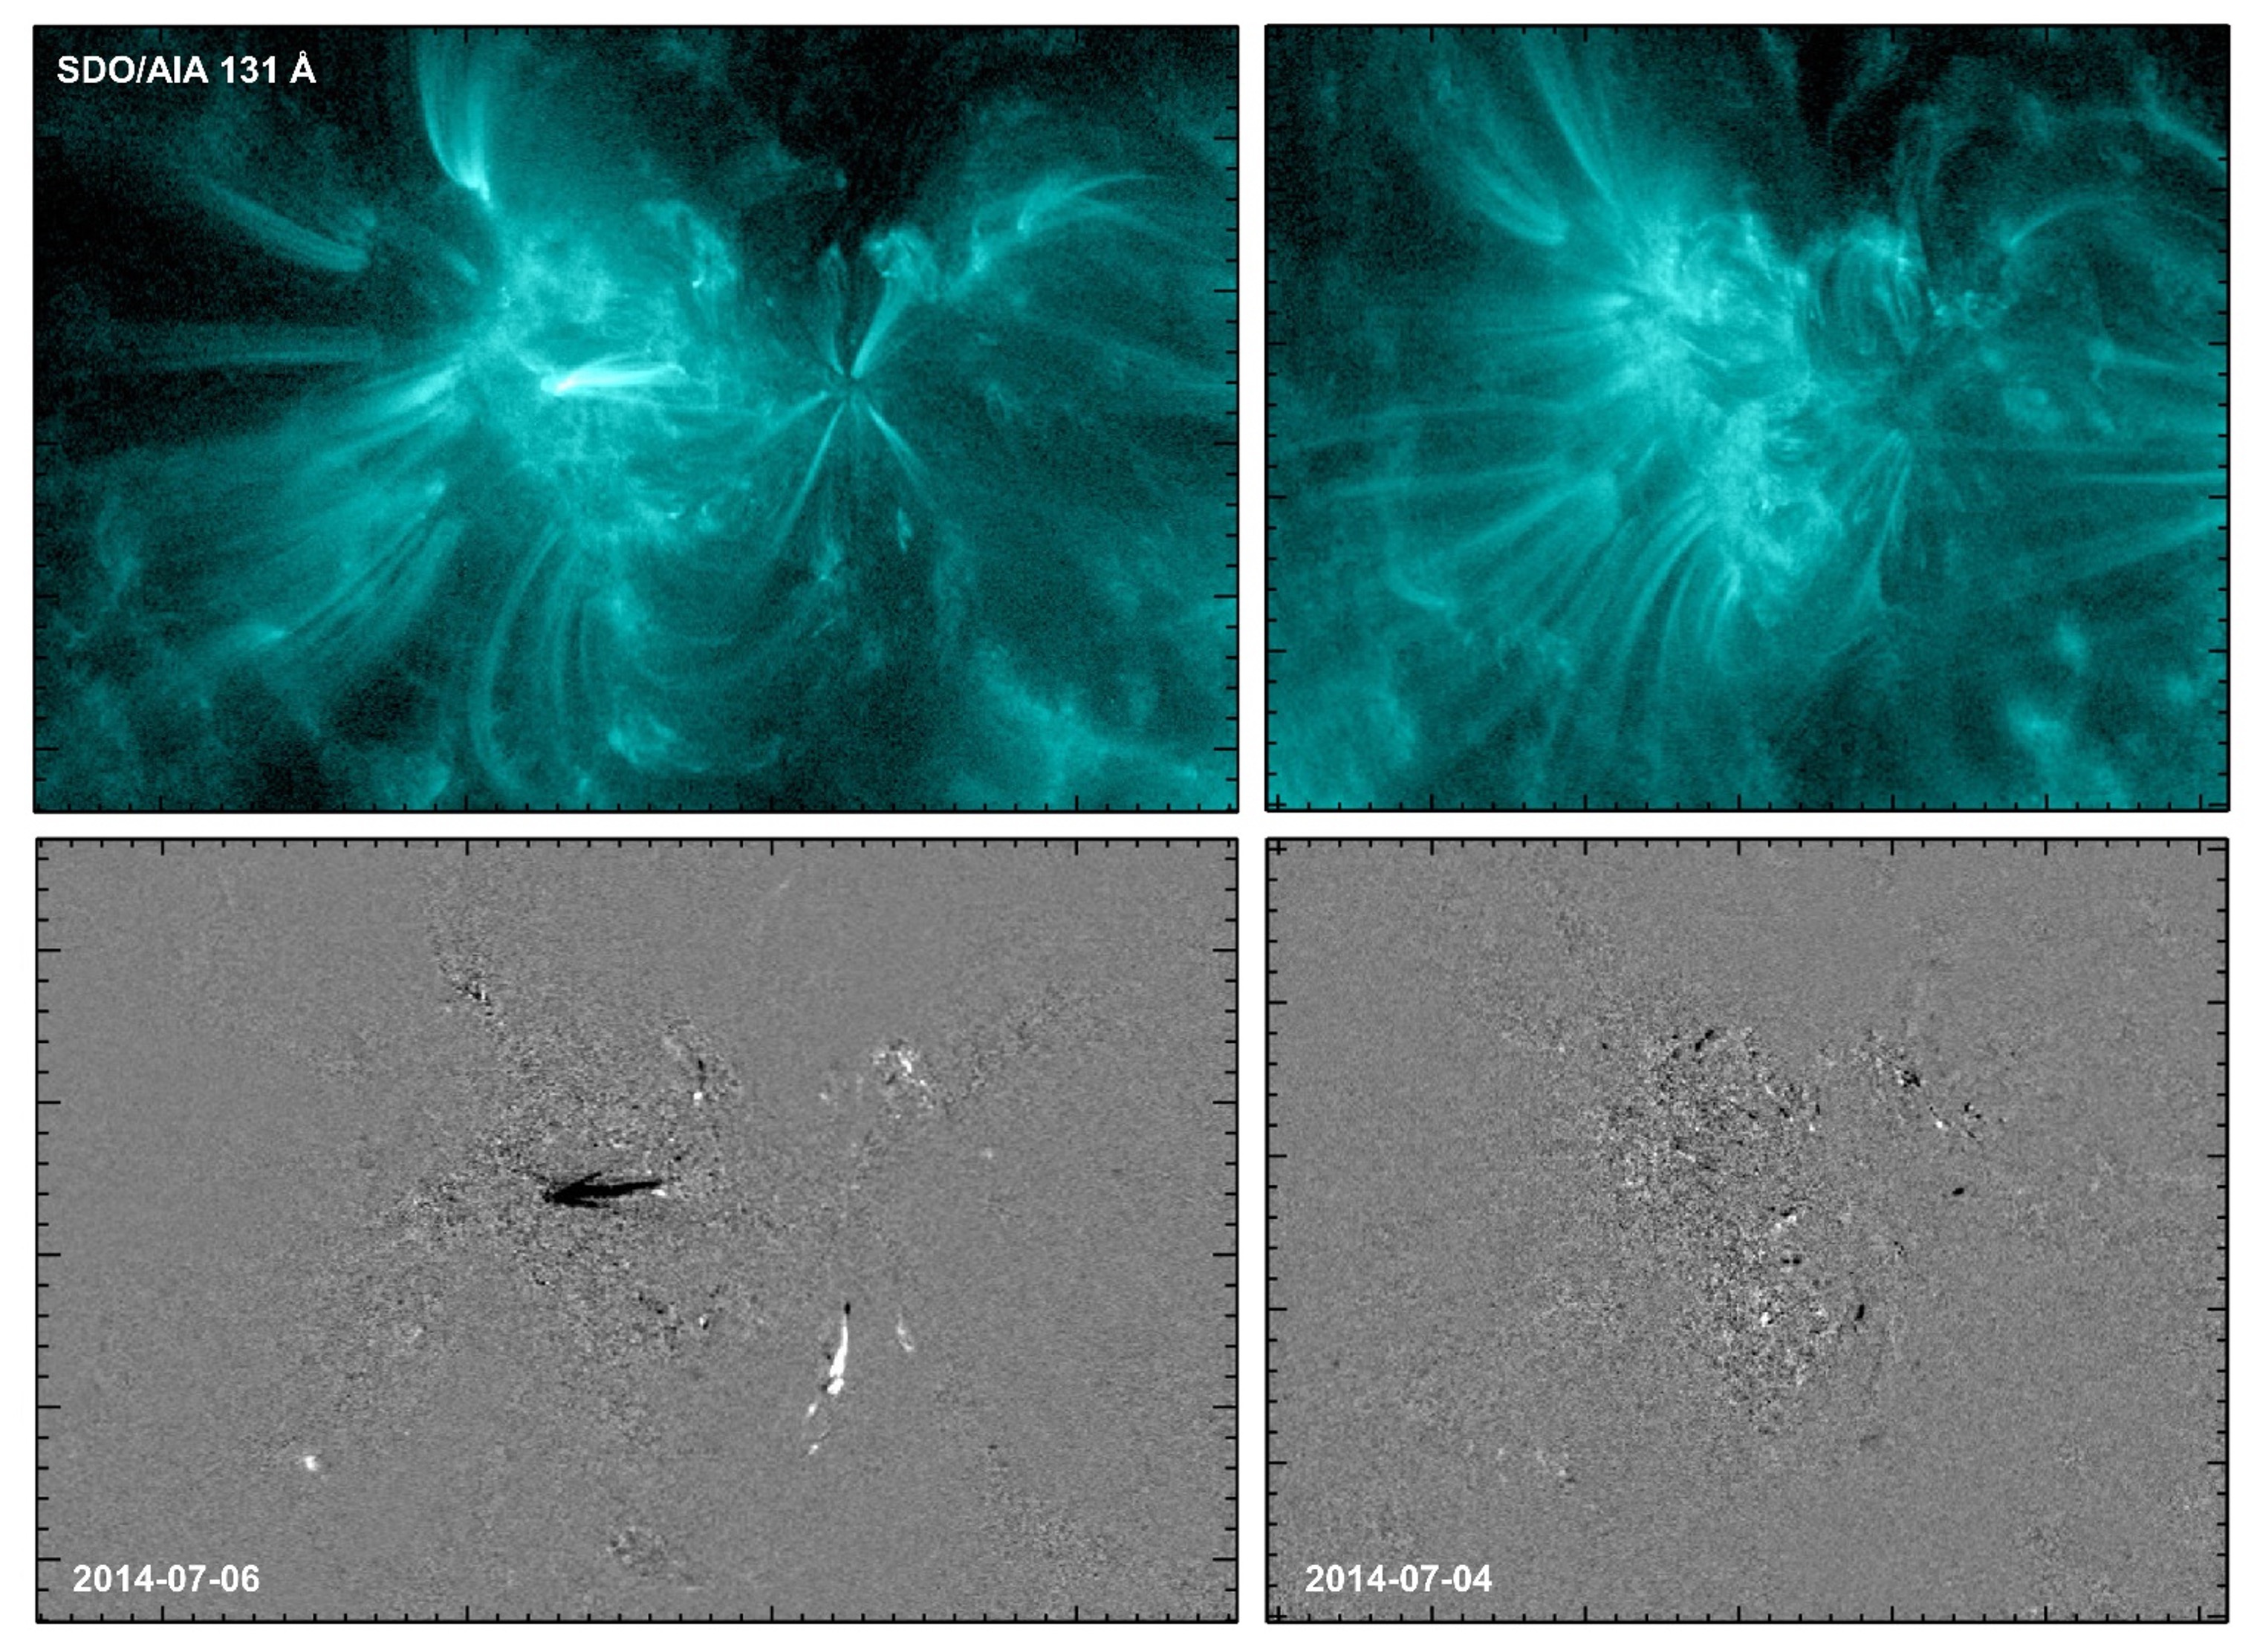 Two images of an active solar region (NOAA AR 2109) taken by SDO/AIA show extreme ultraviolet light produced by million-degree coronal gas (top images) the day before the region exploded (left) and the day before.  stood still and did not shine (on the right).  The changes in brightness (lower images) at these two times show different patterns, with patches of intense variation (black and white areas) before the flare (lower left corner) and mainly gray (indicating low variability) before the quiet period (lower left corner). bottom right).  .